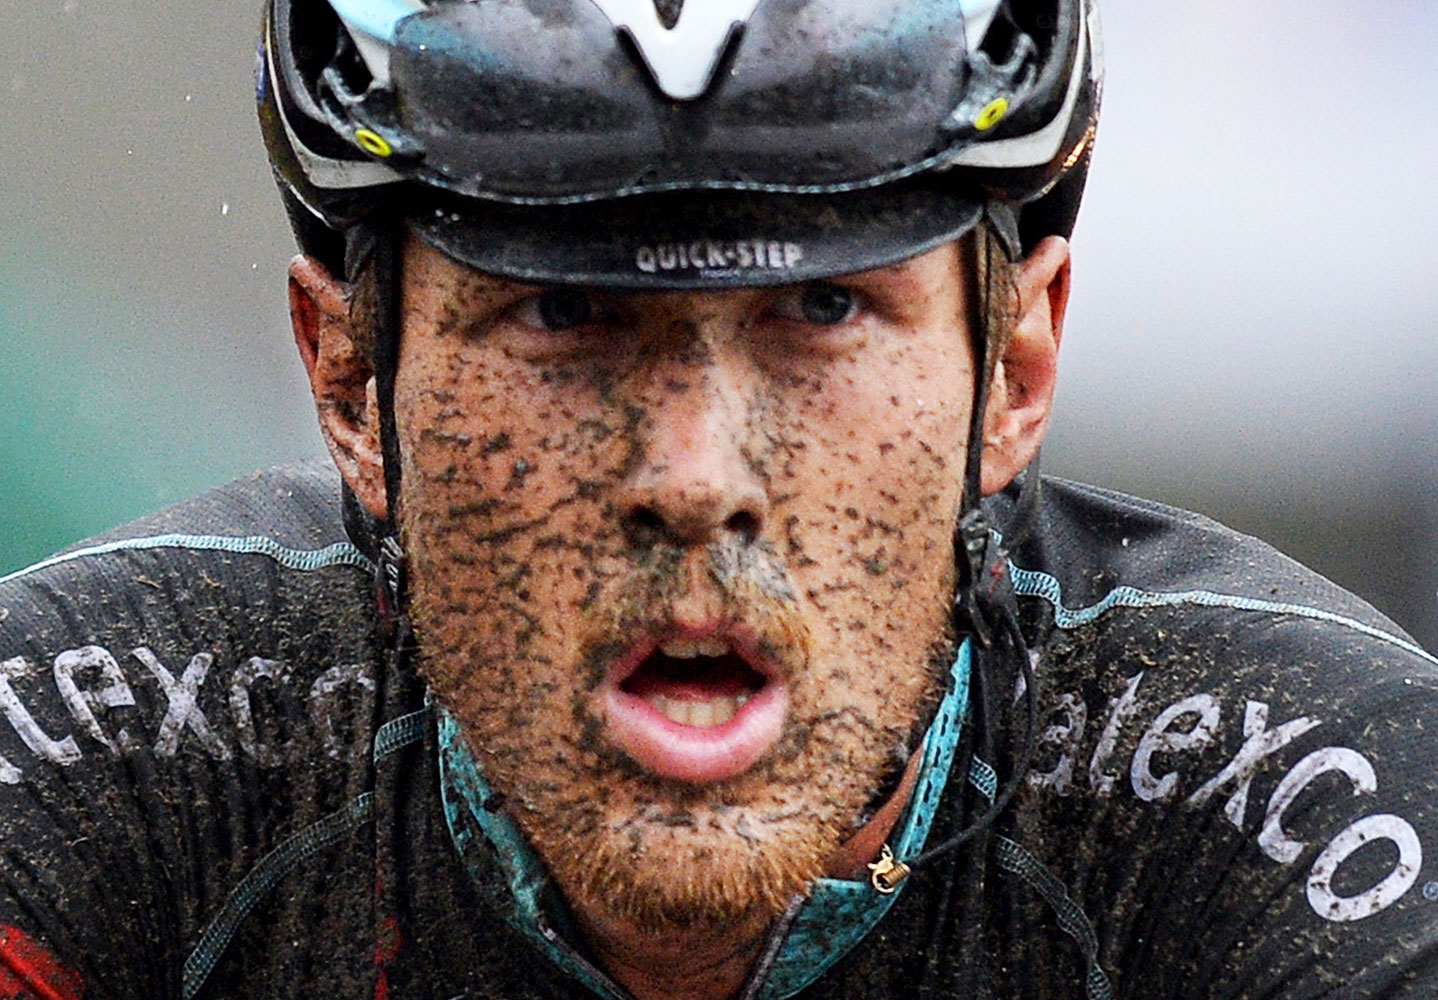 Trentin Matteo of Italy  during the fifth stage of the 2014 Tour de France, a 155km stage between Ypres and Arenberg Porte du Hainaut, on July 9, 2014